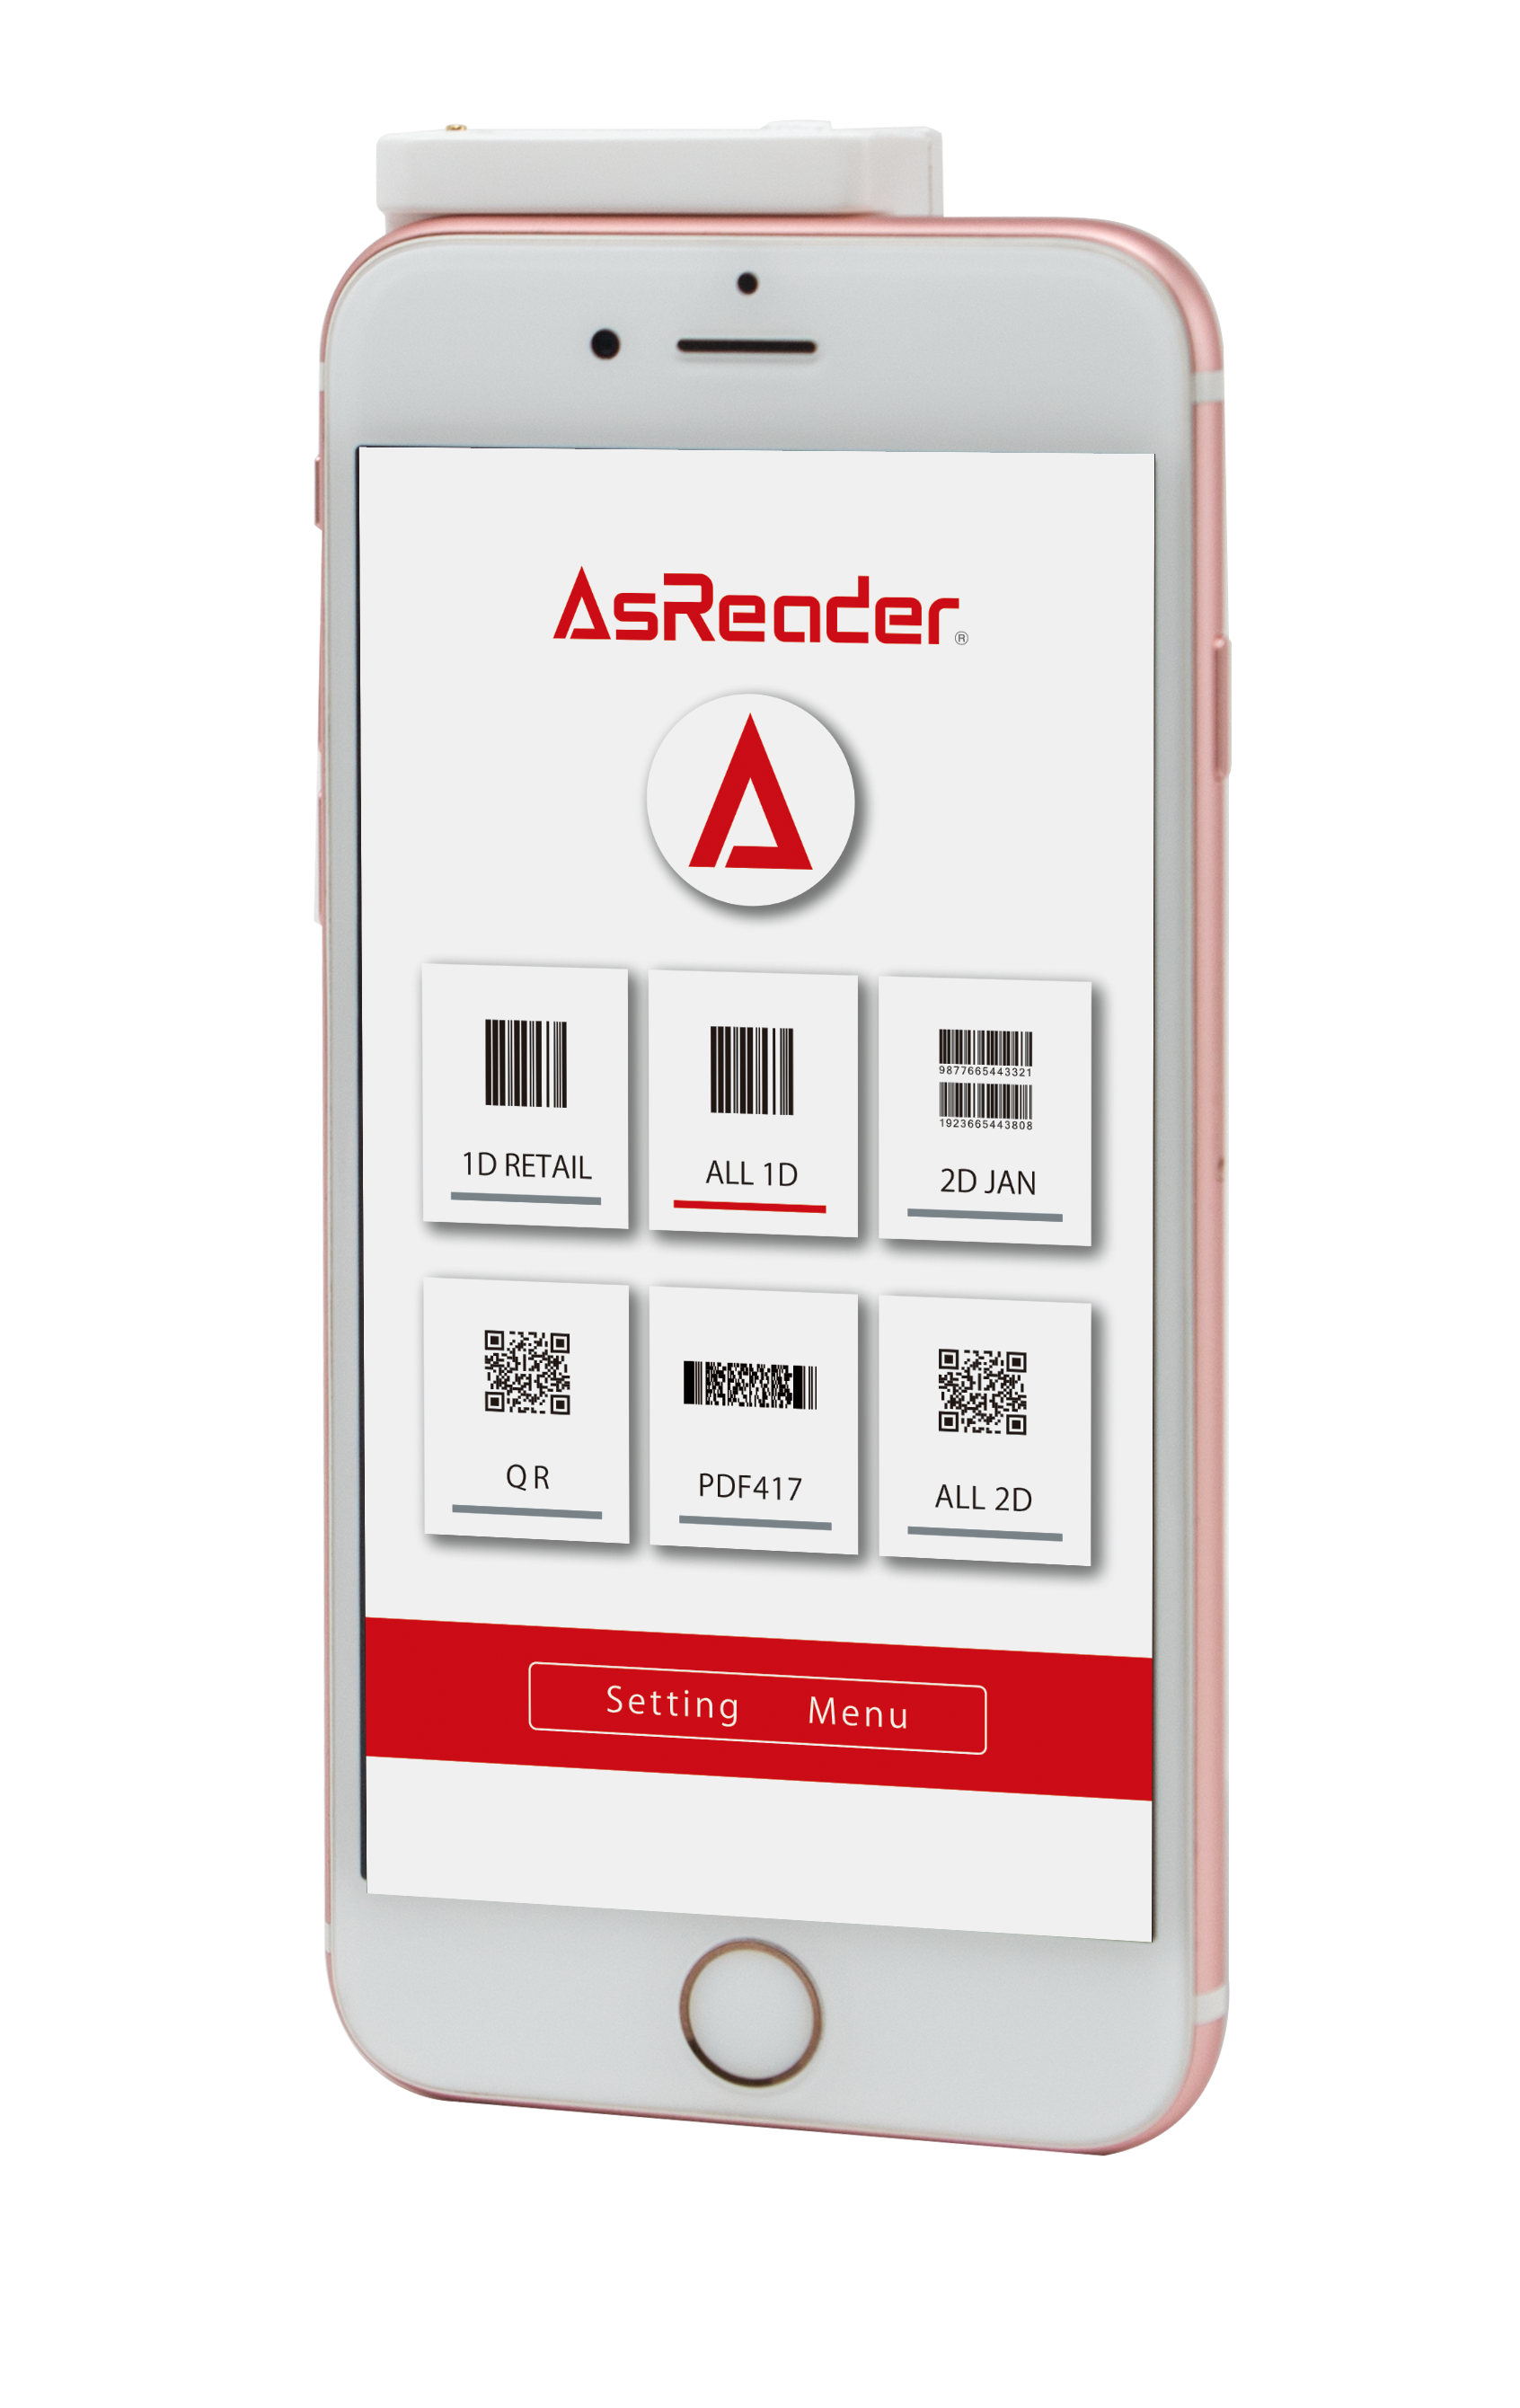 AsReader Camera Type Laser-Pointer with advanced Barcode Scanning software for iPhone or Android